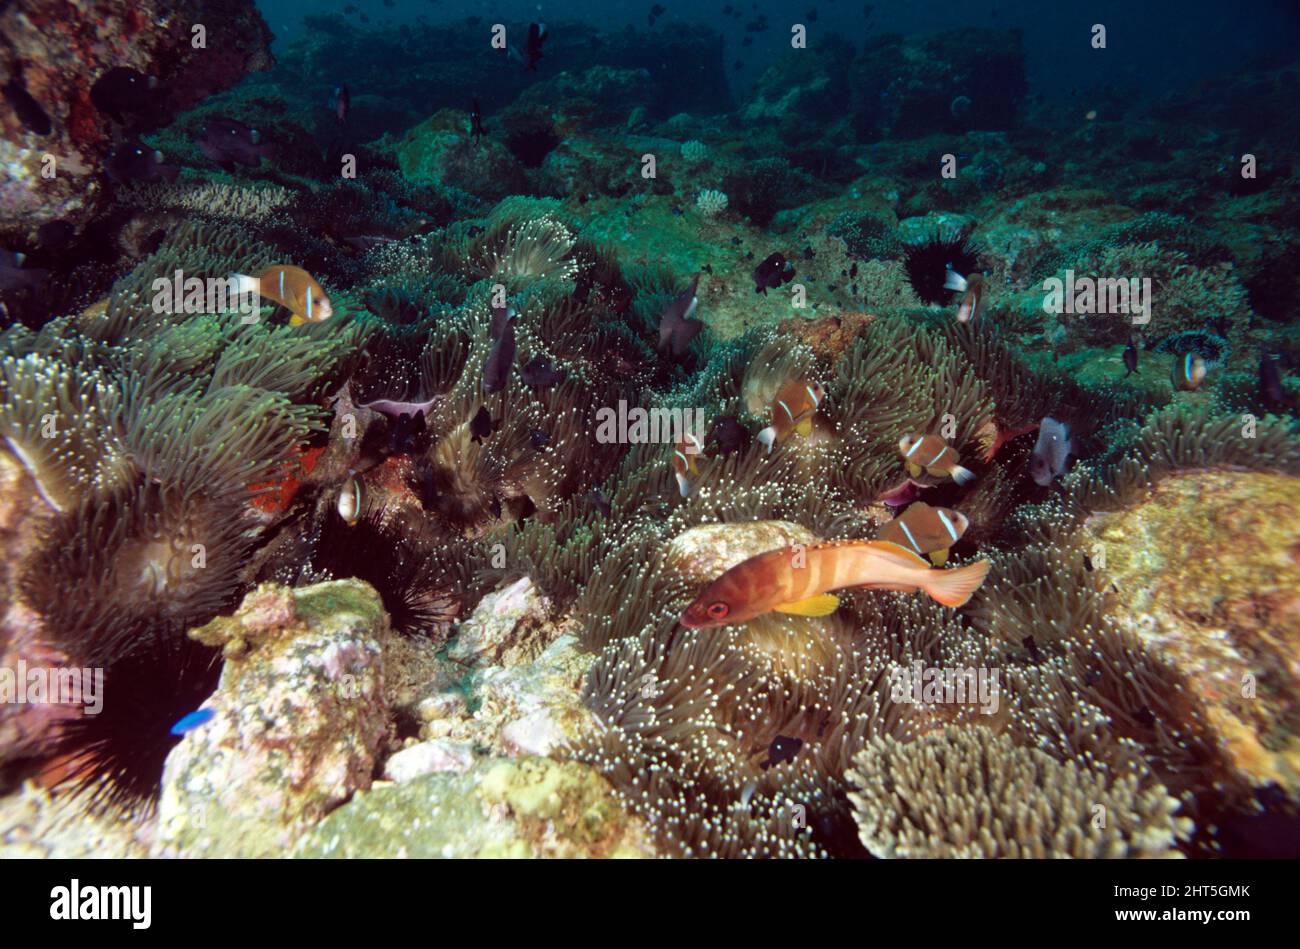 Dense aggregation of anemones with anemonefish. North Solitary Islands, New South Wales, Australia Stock Photo